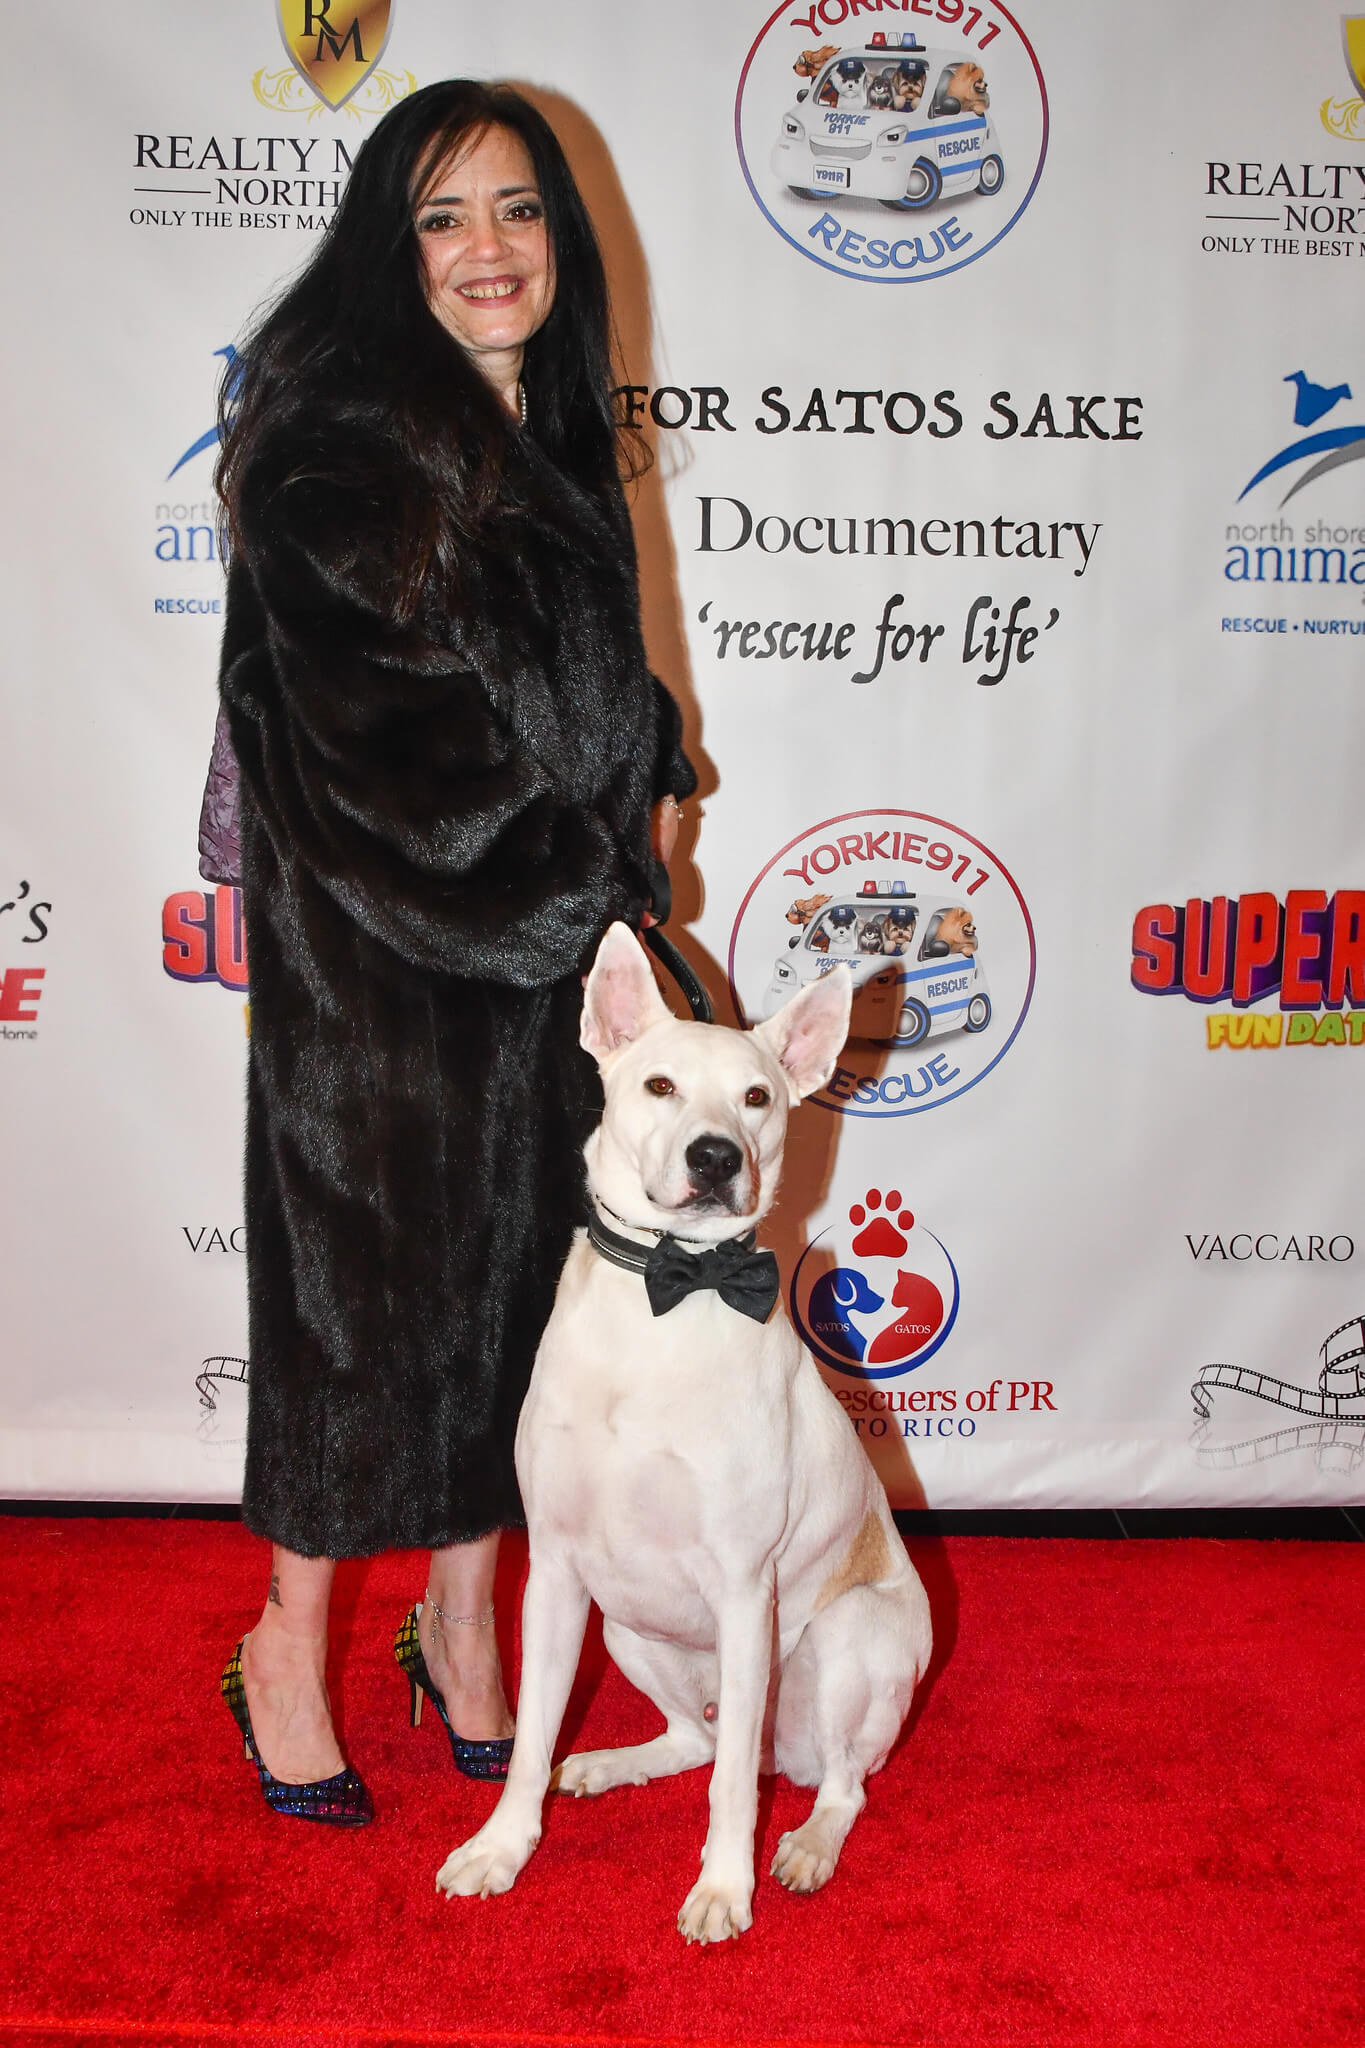 Image 12 Theresa Bellafiore with